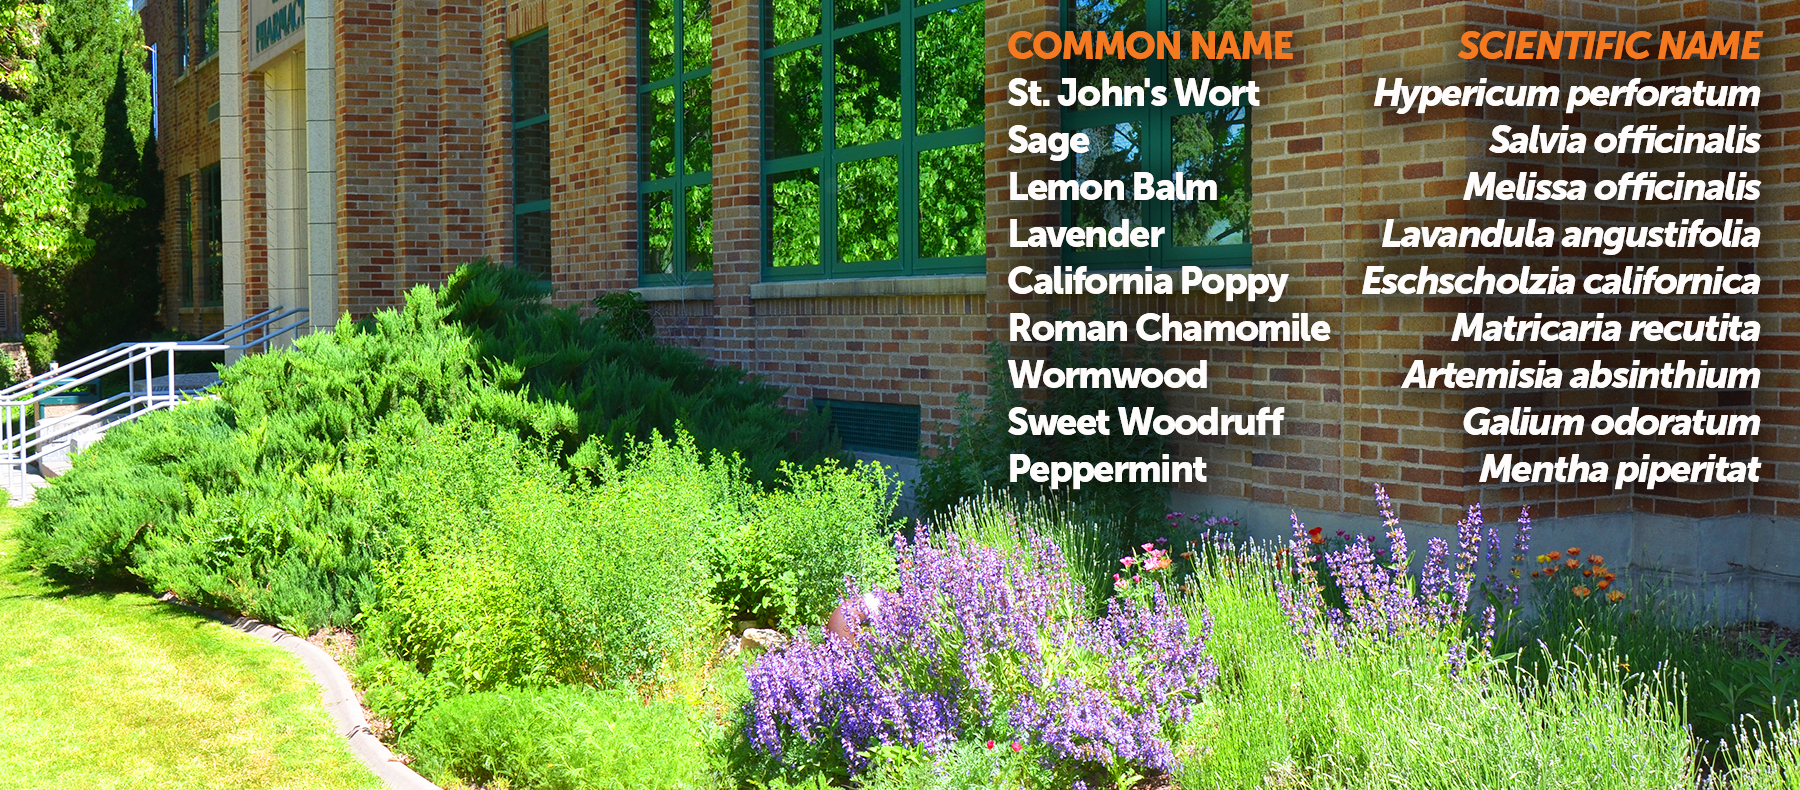 Common Names and Scientific Names of garden plants